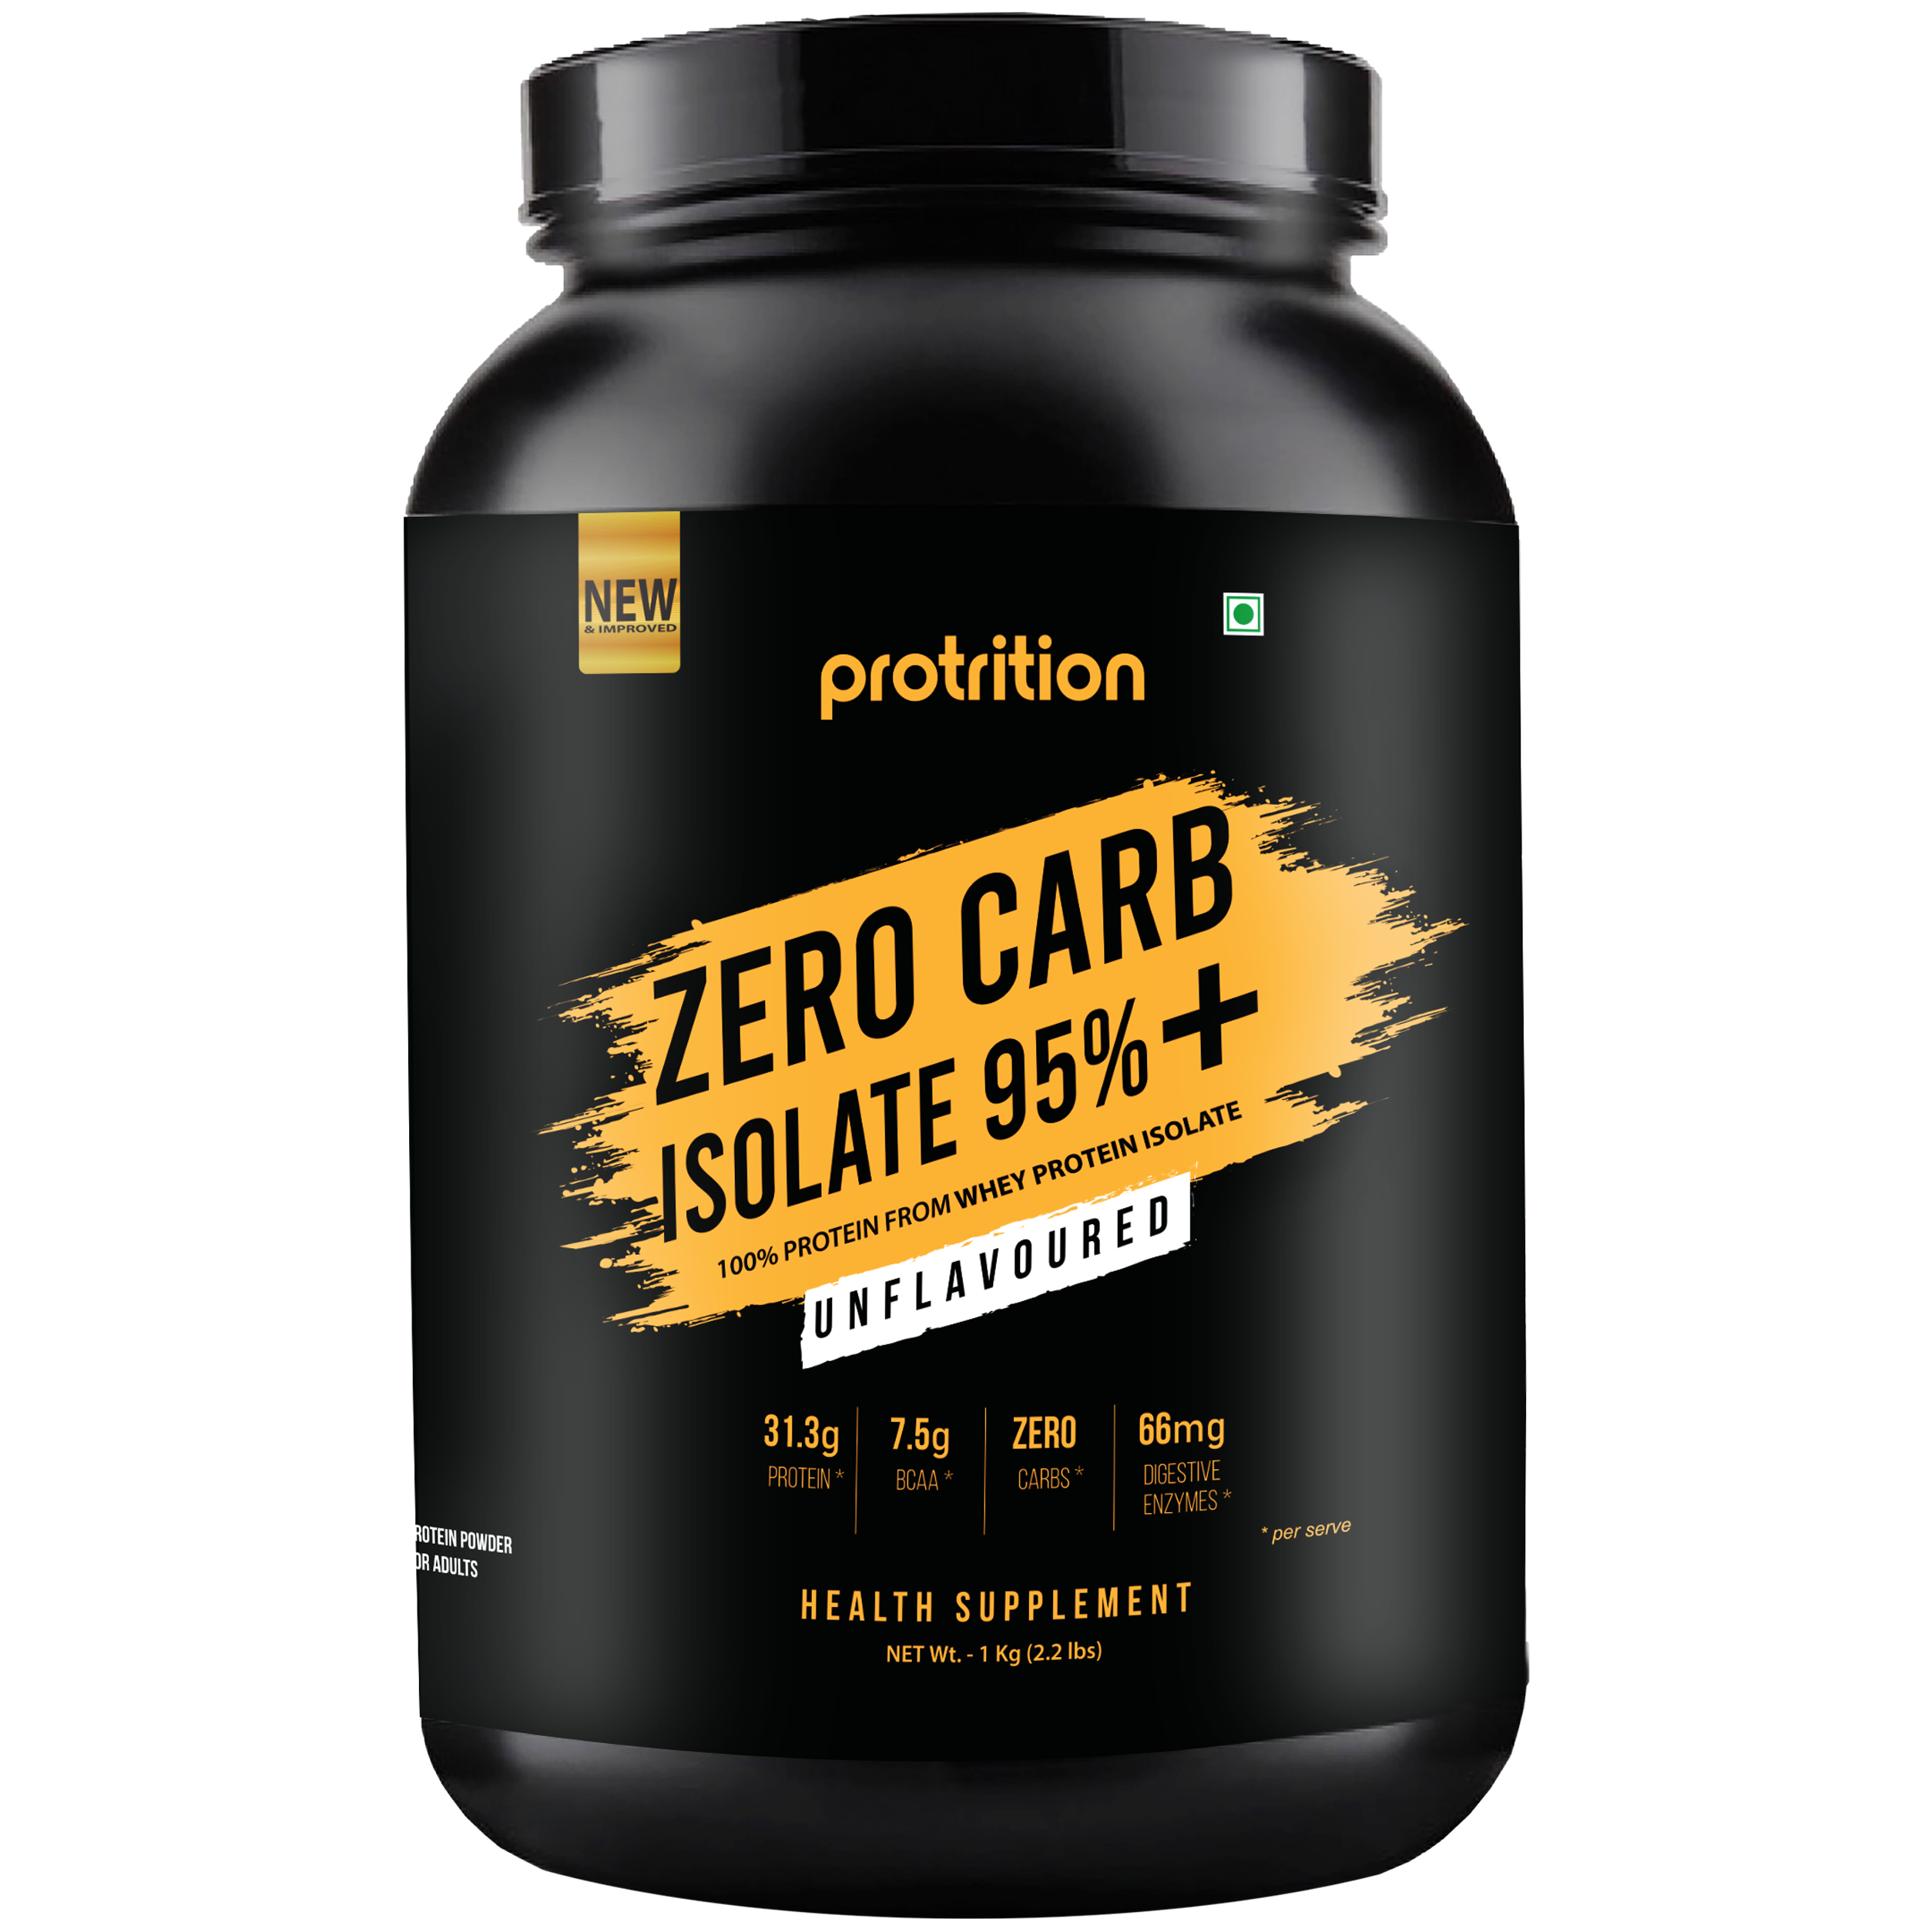 Protrition Zero Carb Isolate 95%, 1Kg, Unflavoured